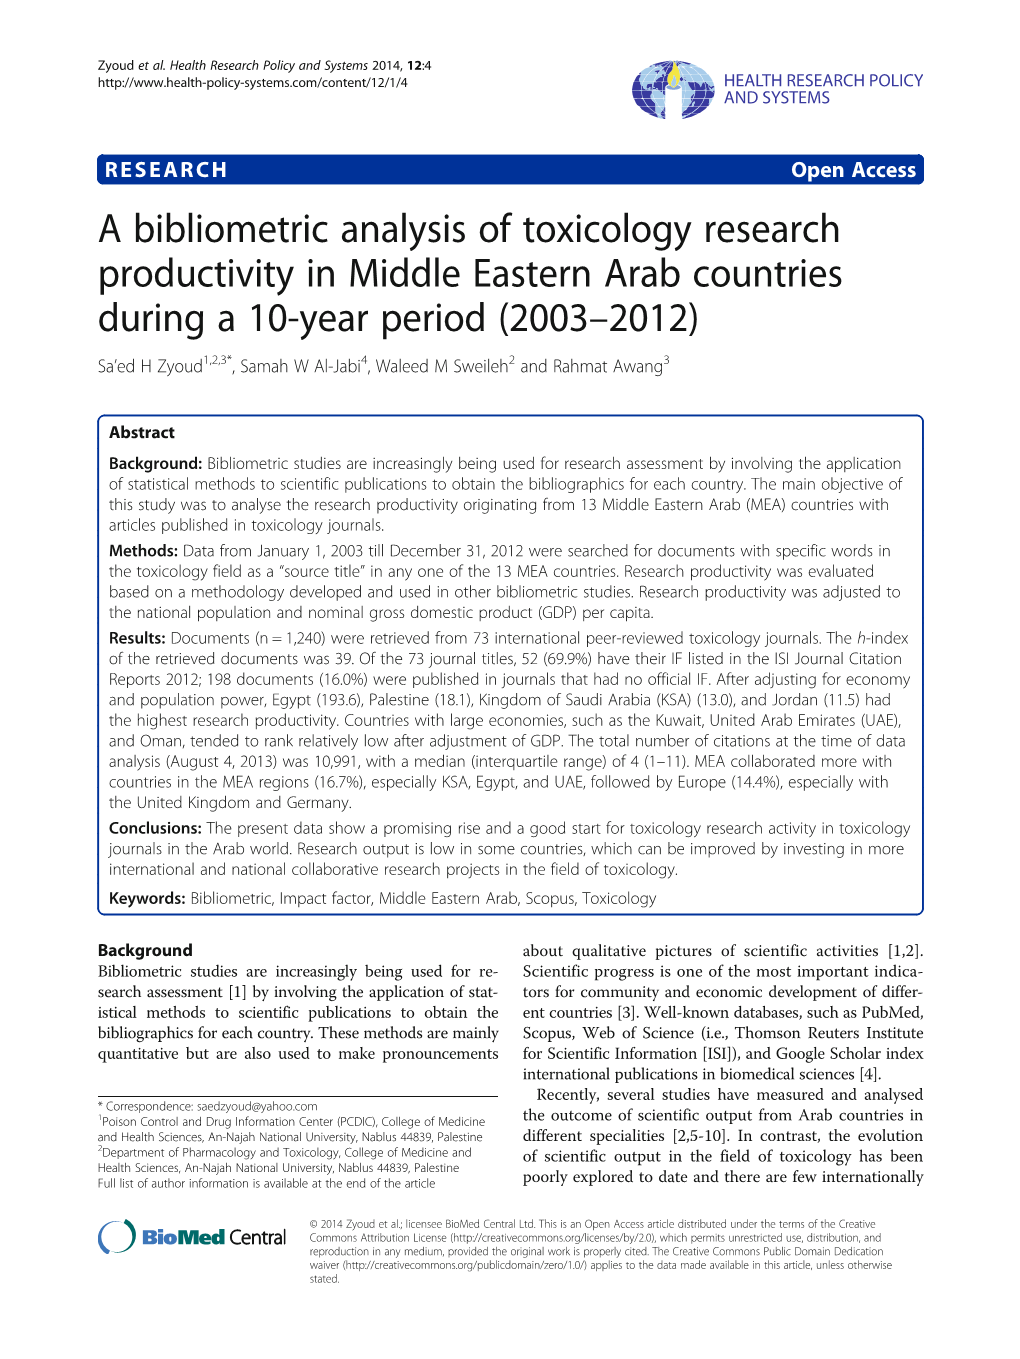 A Bibliometric Analysis of Toxicology Research